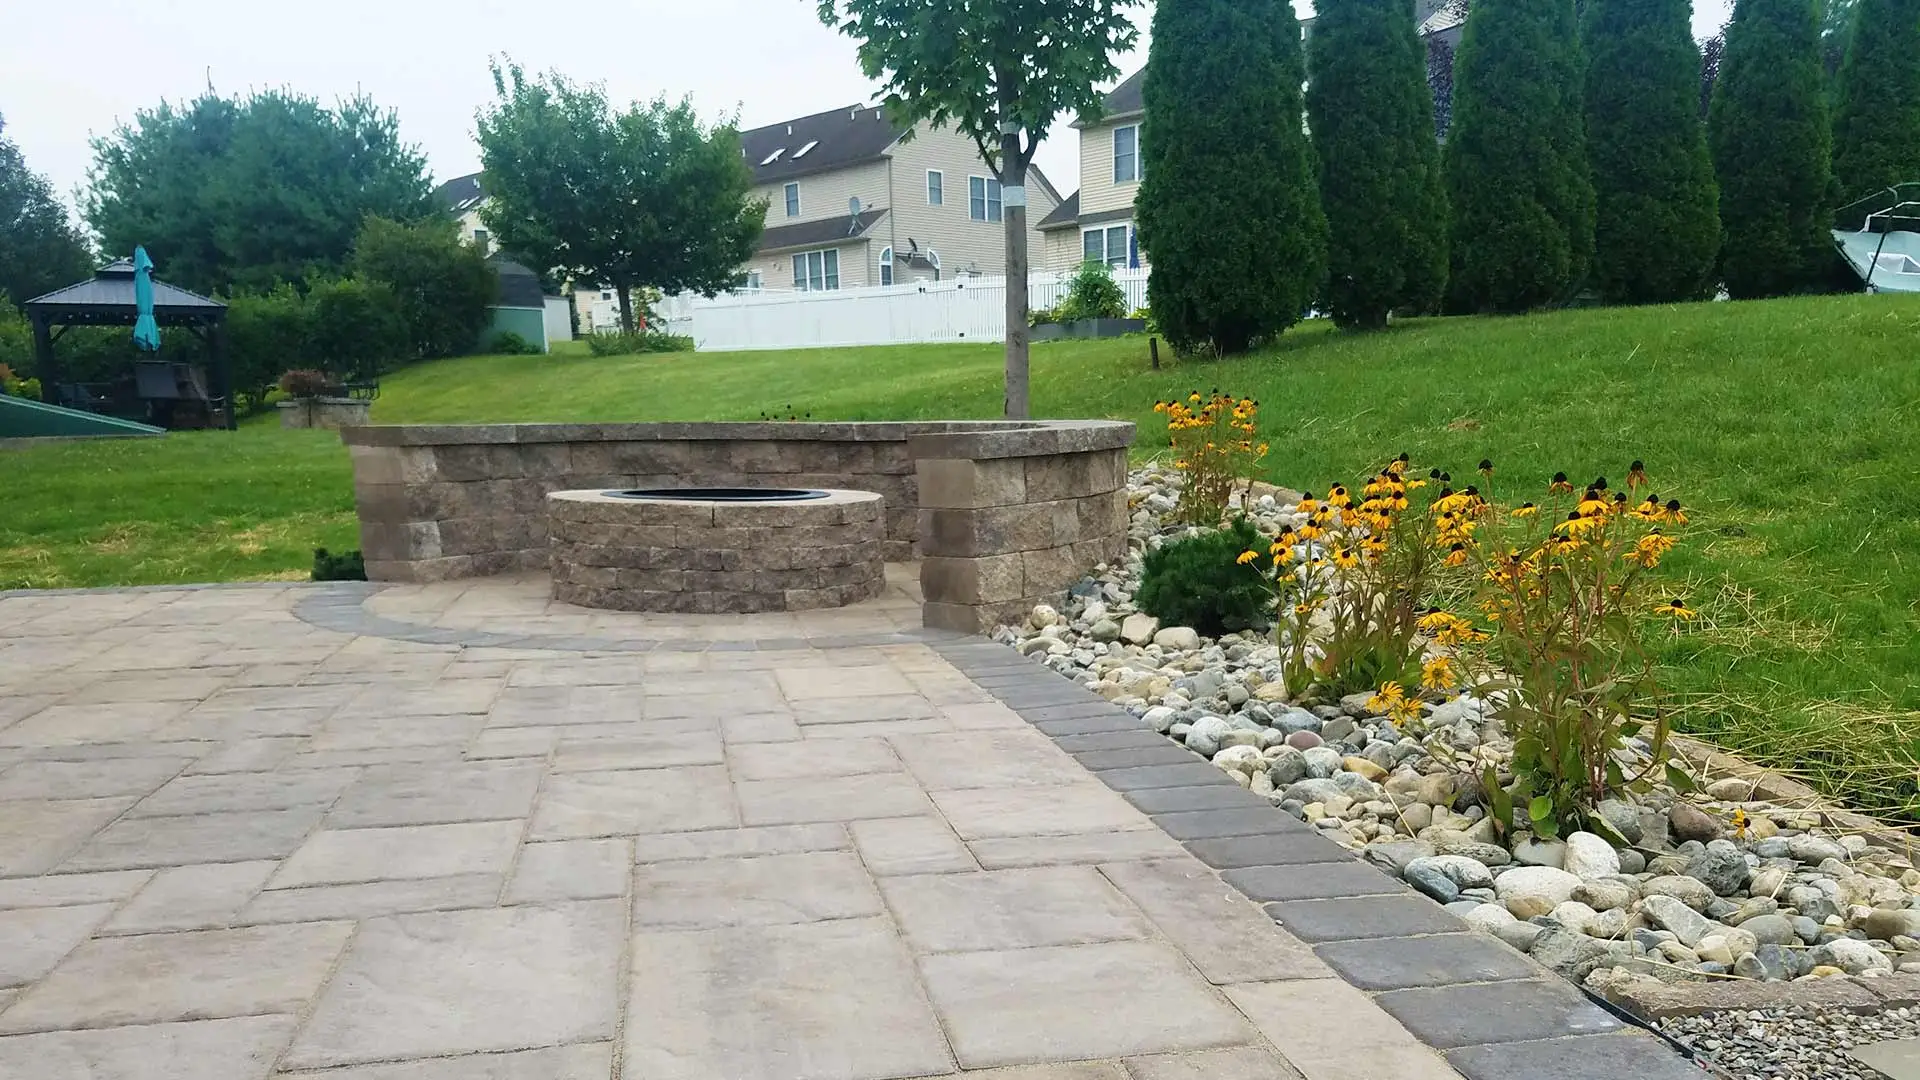 Custom fire pit and stone patio construction at a home in Allentown, PA.